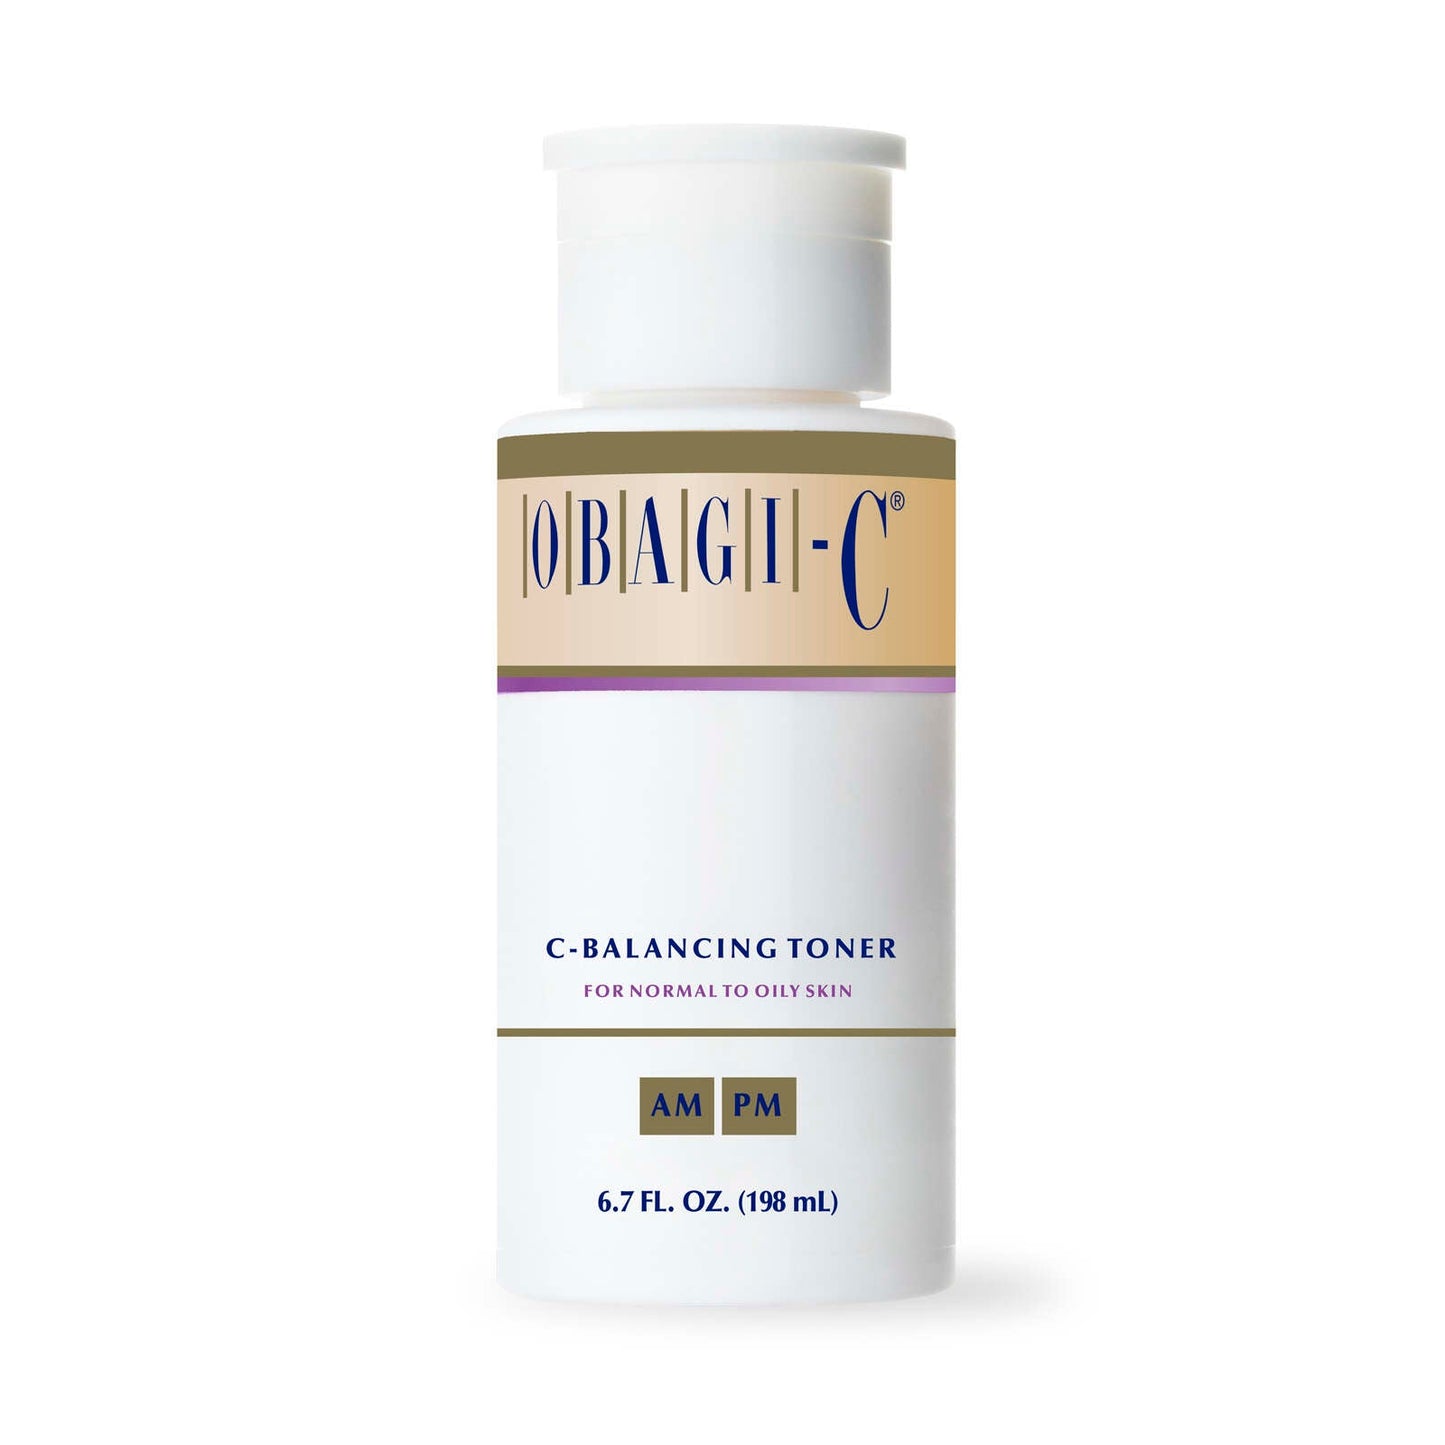 Buy Online Best OBAGI - Balancing Toner | Buy innovative clinical skincare products - TOPBODY